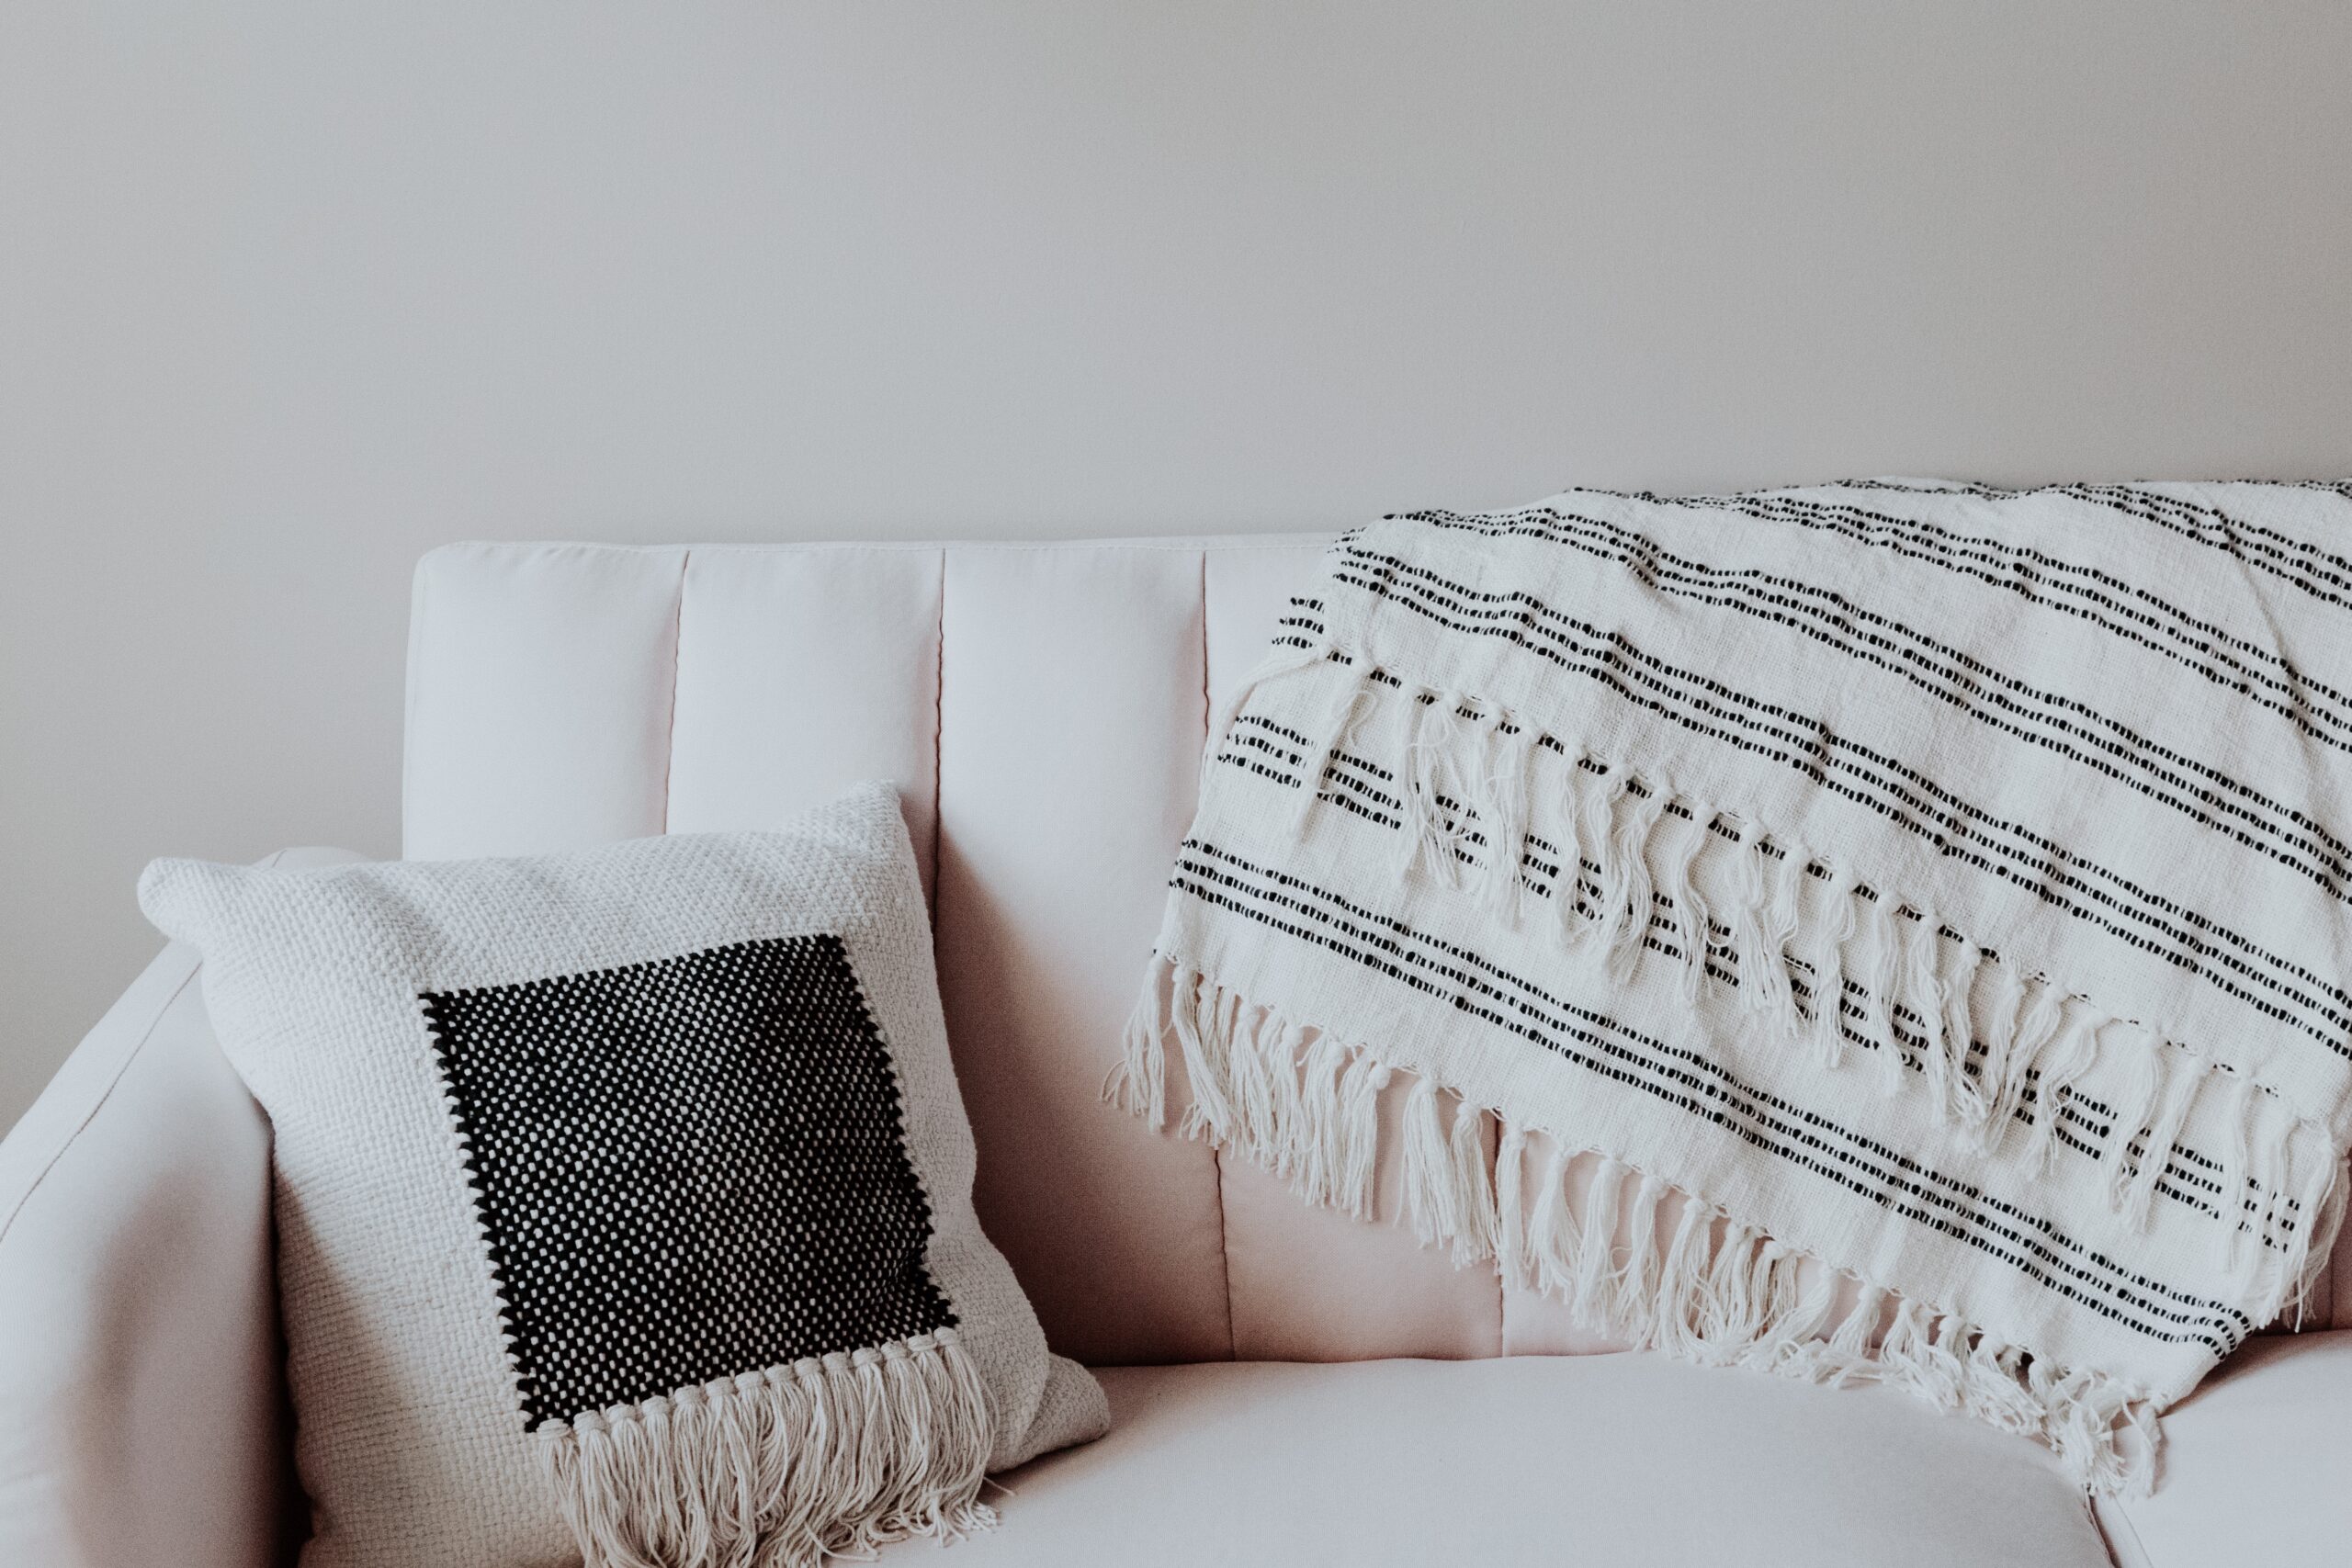 Texture and softness are both elements that should be incorporated into your zen room for mindful meditation practice. Pictured: A couch with a throw blanket and pillow.